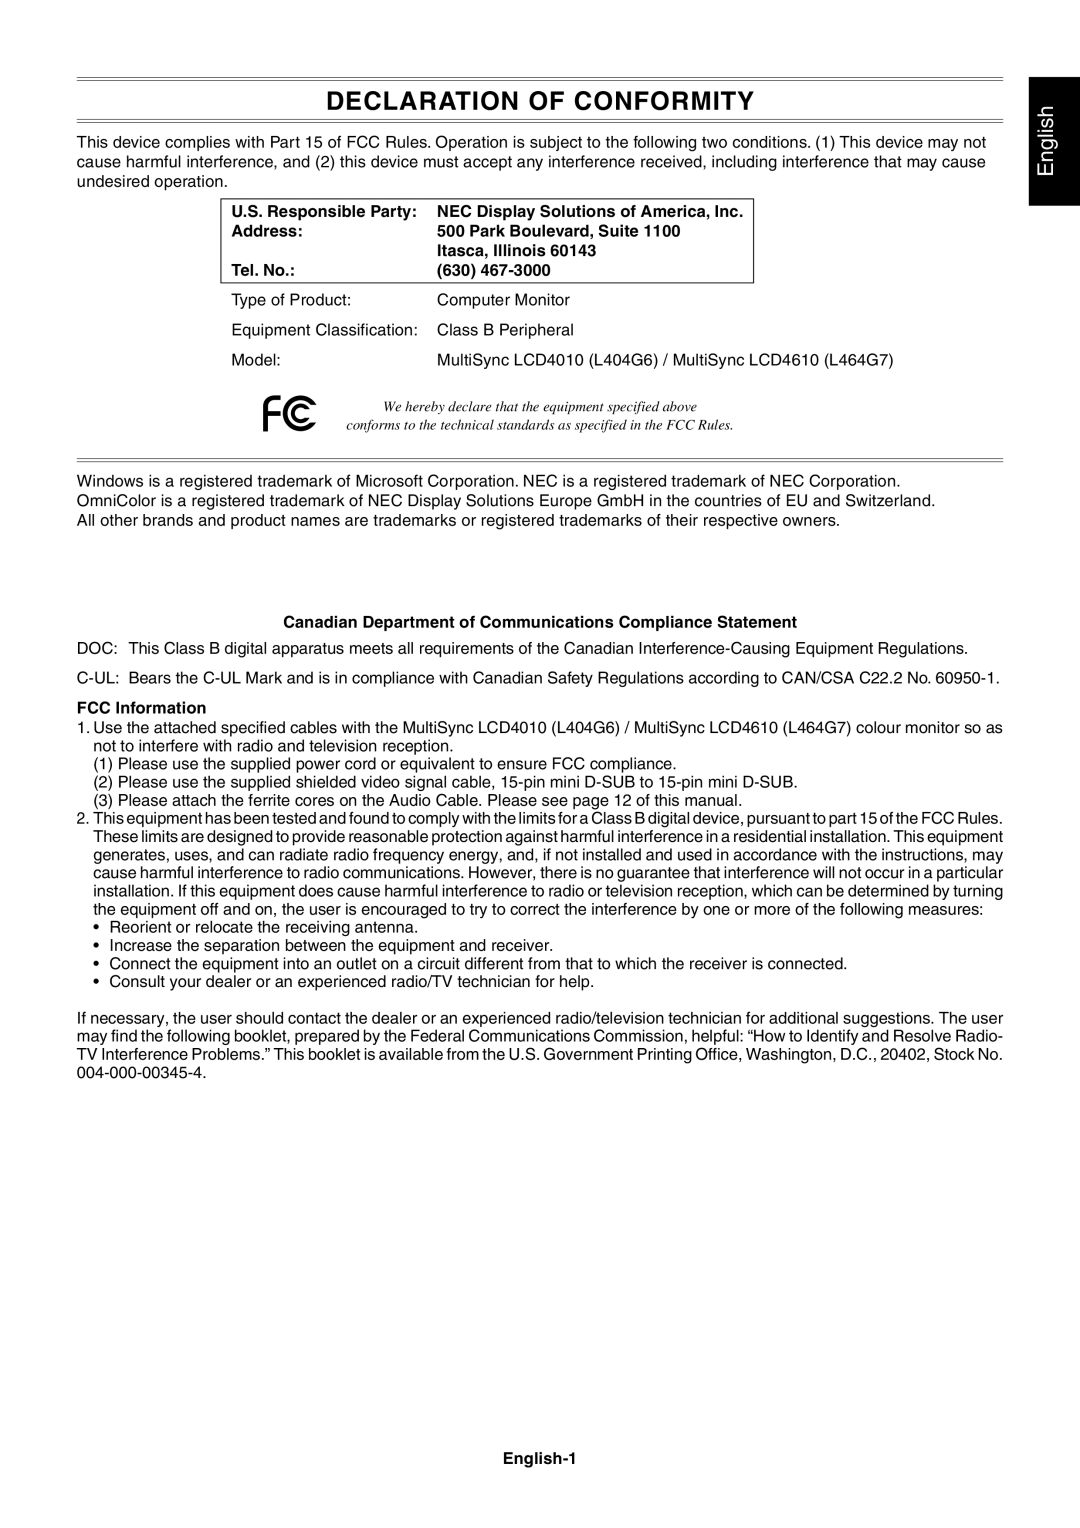 NEC LCD4010, LCD4610 user manual Canadian Department of Communications Compliance Statement, FCC Information, English-1 